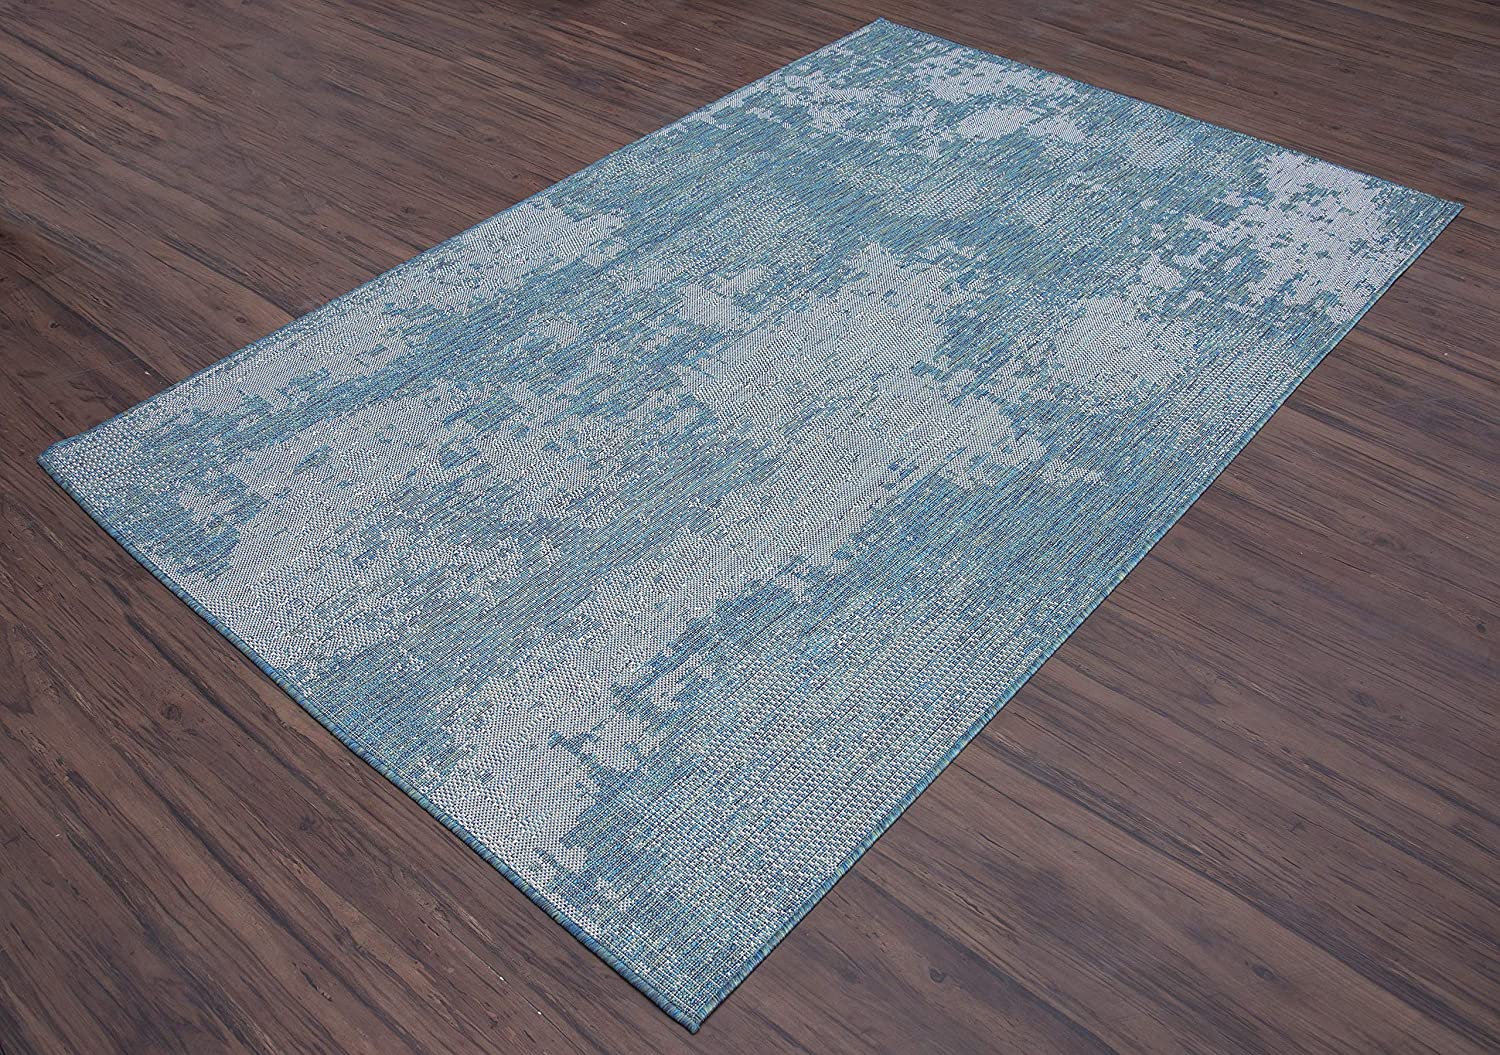 Abstract Vintage Rug - 5 ft. 3 in. x 7 ft. 6 in., Ocean, Indoor/Outdoor Area Rug with Distressed Pattern, Stain Resistant, Washable Rug | Stylish Area Rugs - image 3 of 8